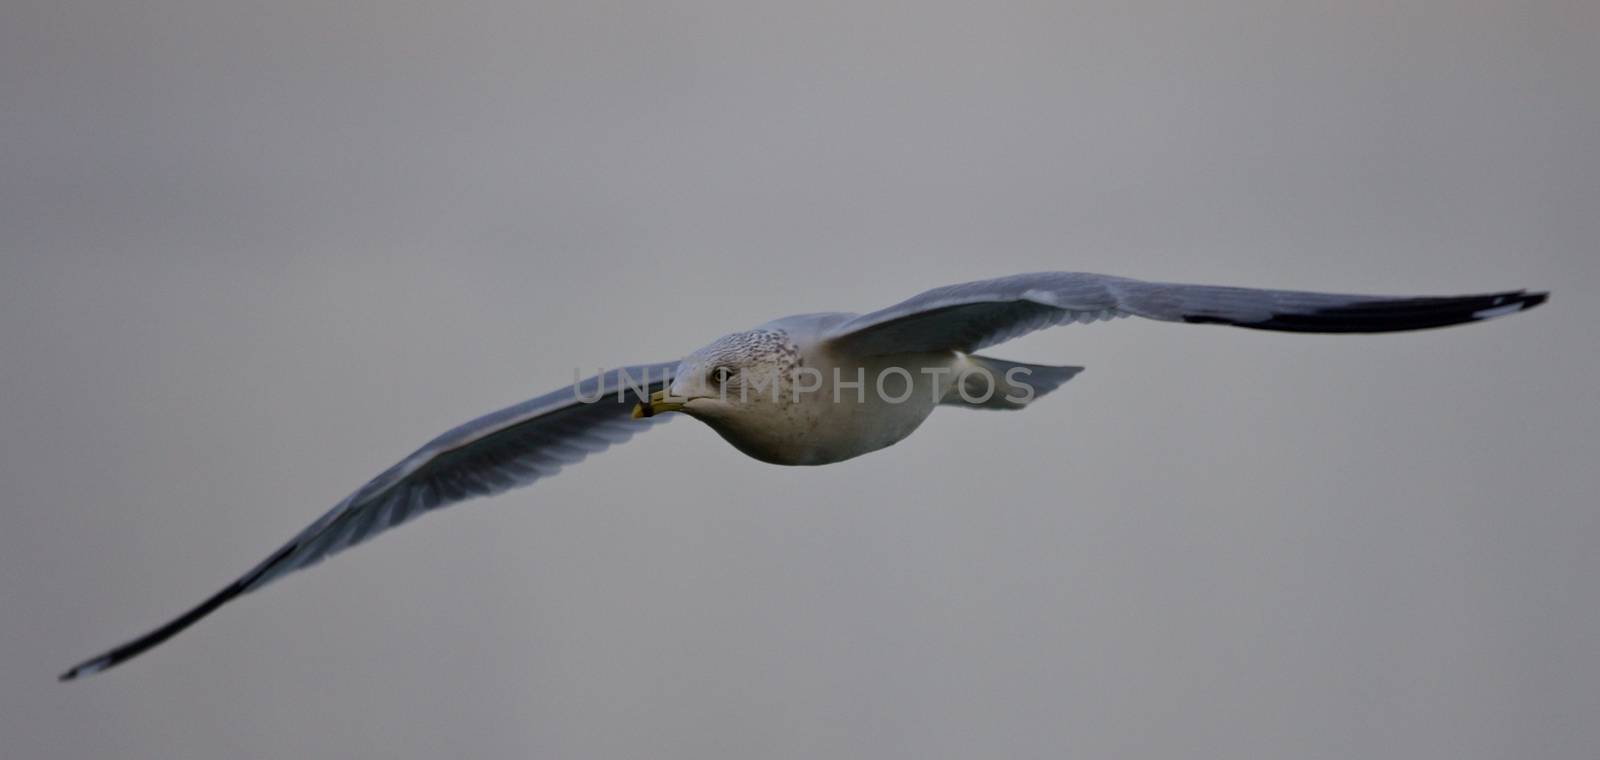 Beautiful photo of a flying gull